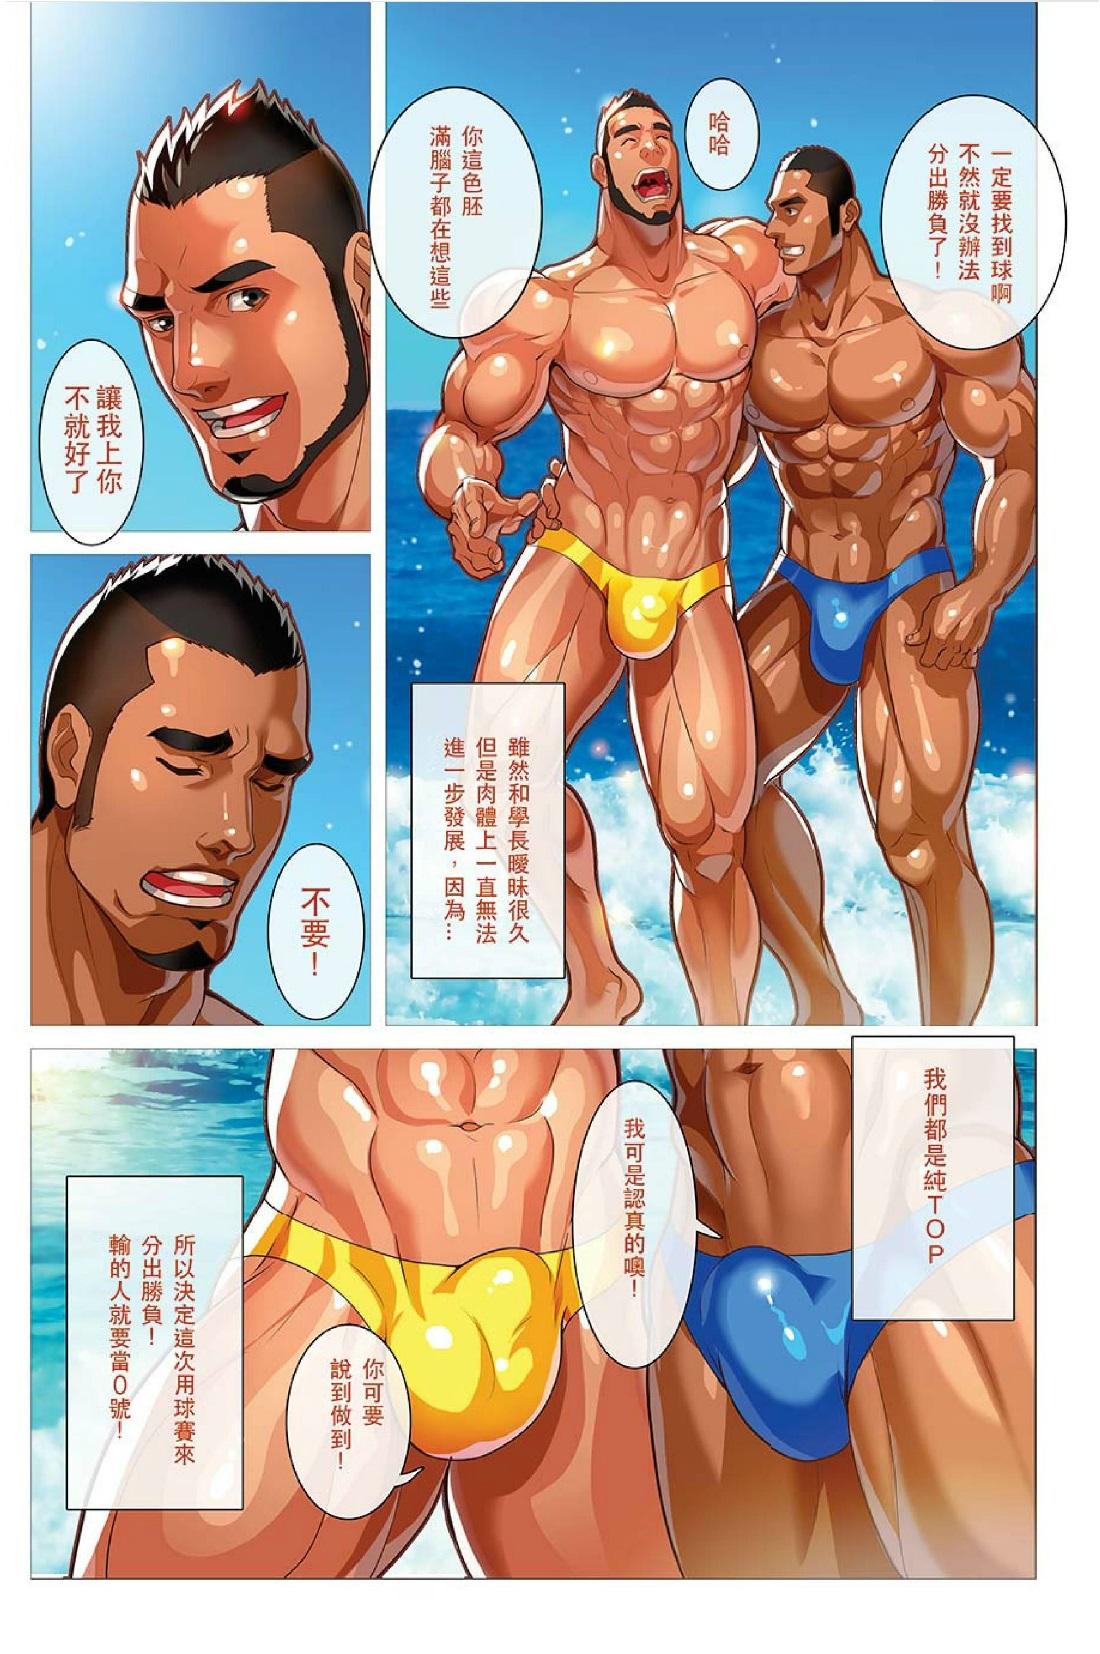 Lesbo 夏日男子筋肉潛艇堡 (Summer's end Muscle Heat - The Boys Of Summer 2015) by 大雄 (Da Sexy Xiong) + Bonus Prequel [CH] Fisting - Page 4